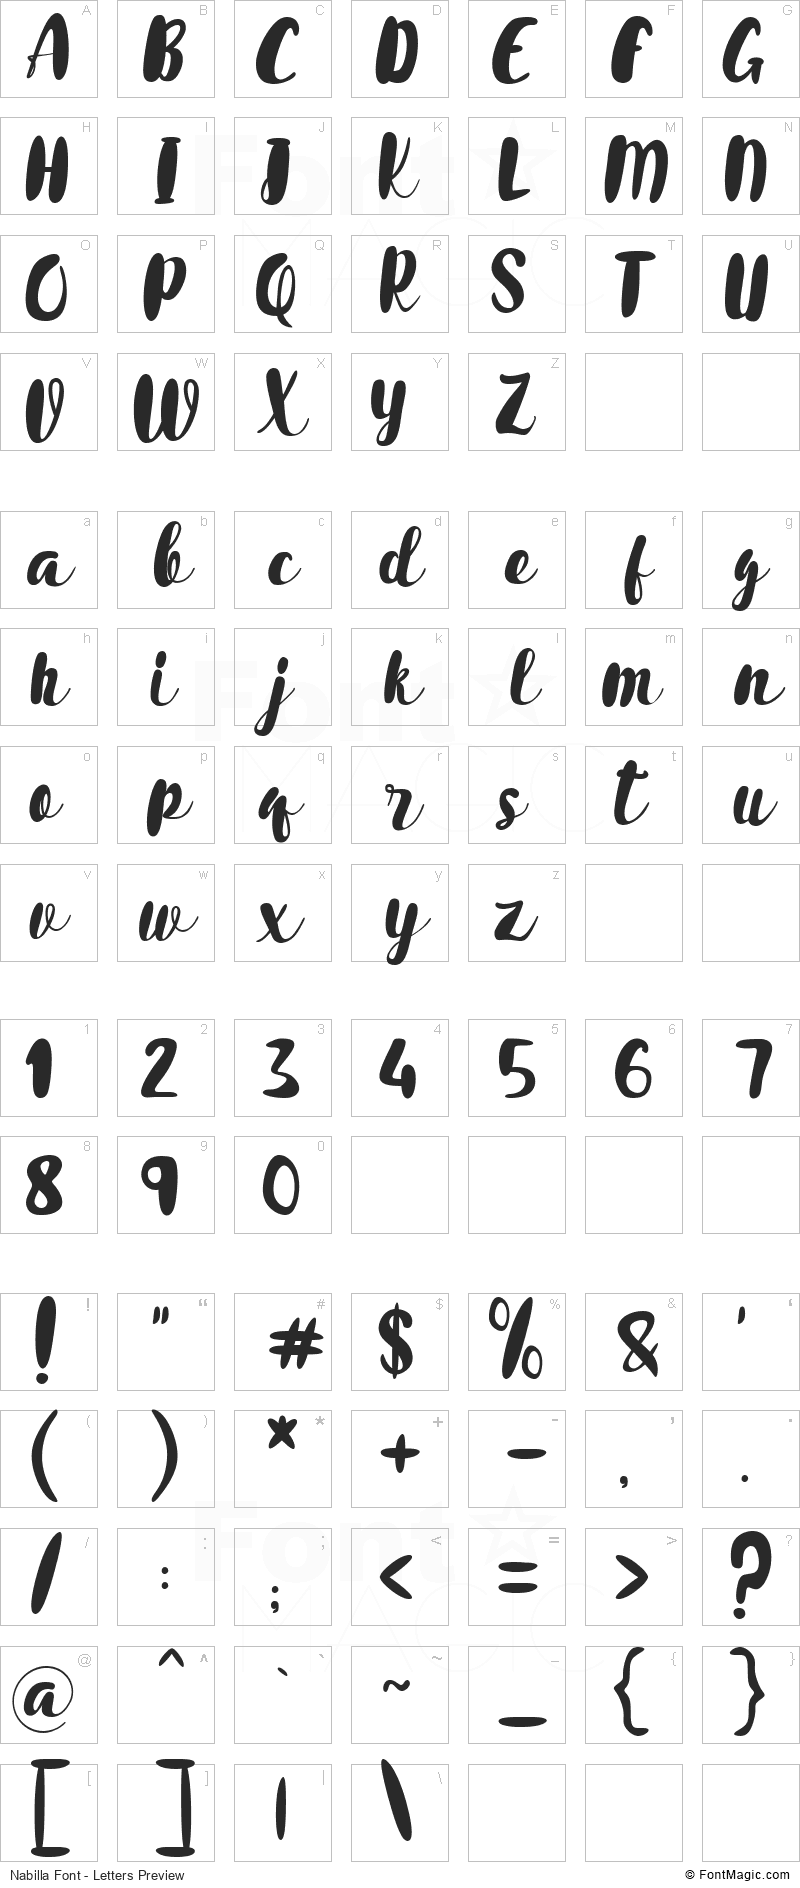 Nabilla Font - All Latters Preview Chart